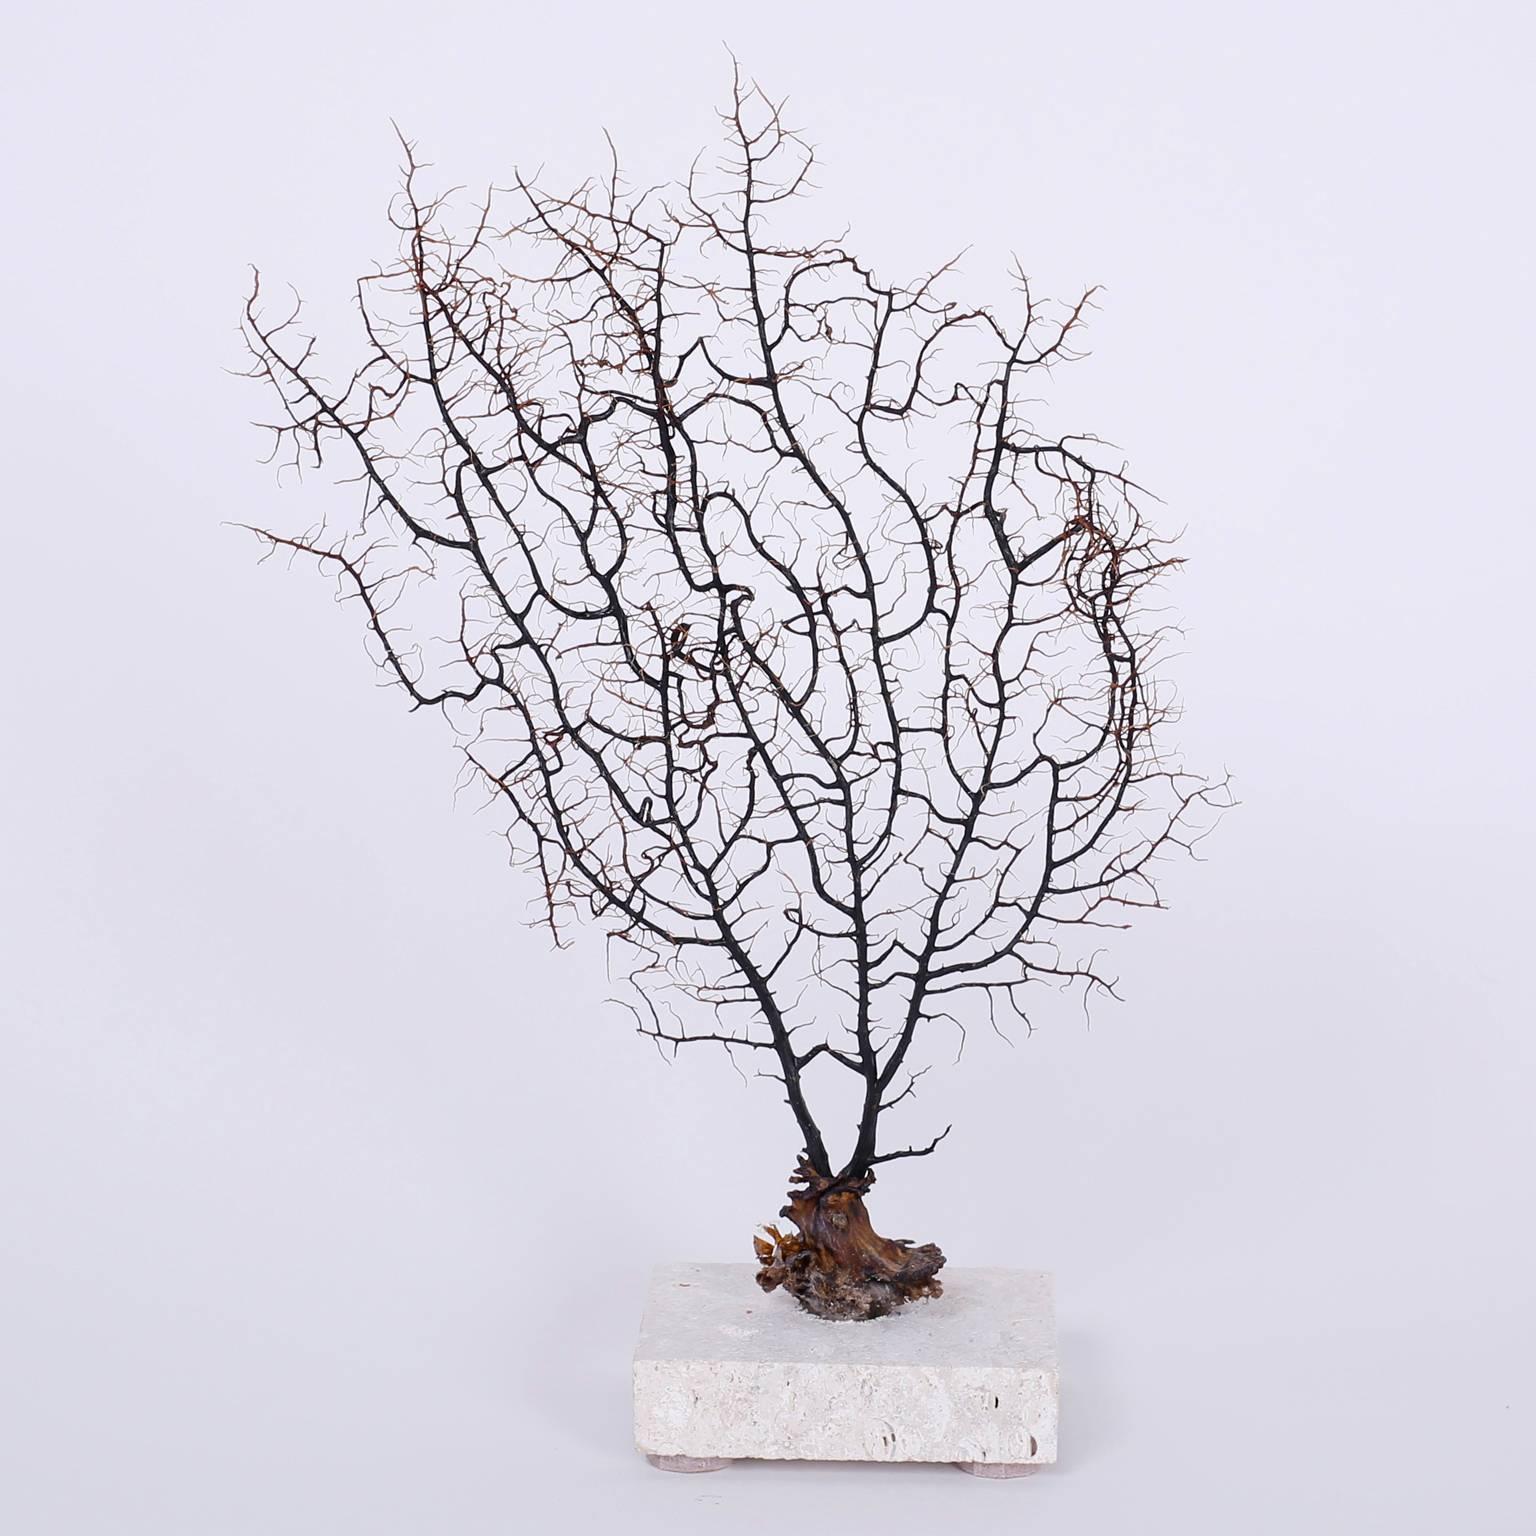 Here are three black sea fan specimens, each with its own unique tree like form and organic textures. Presented on coquina bases to enhance their sculptural values. Priced individually.

Measures: From left to right:

Ref: BLSFC- H: 12 W: 8 D: 3